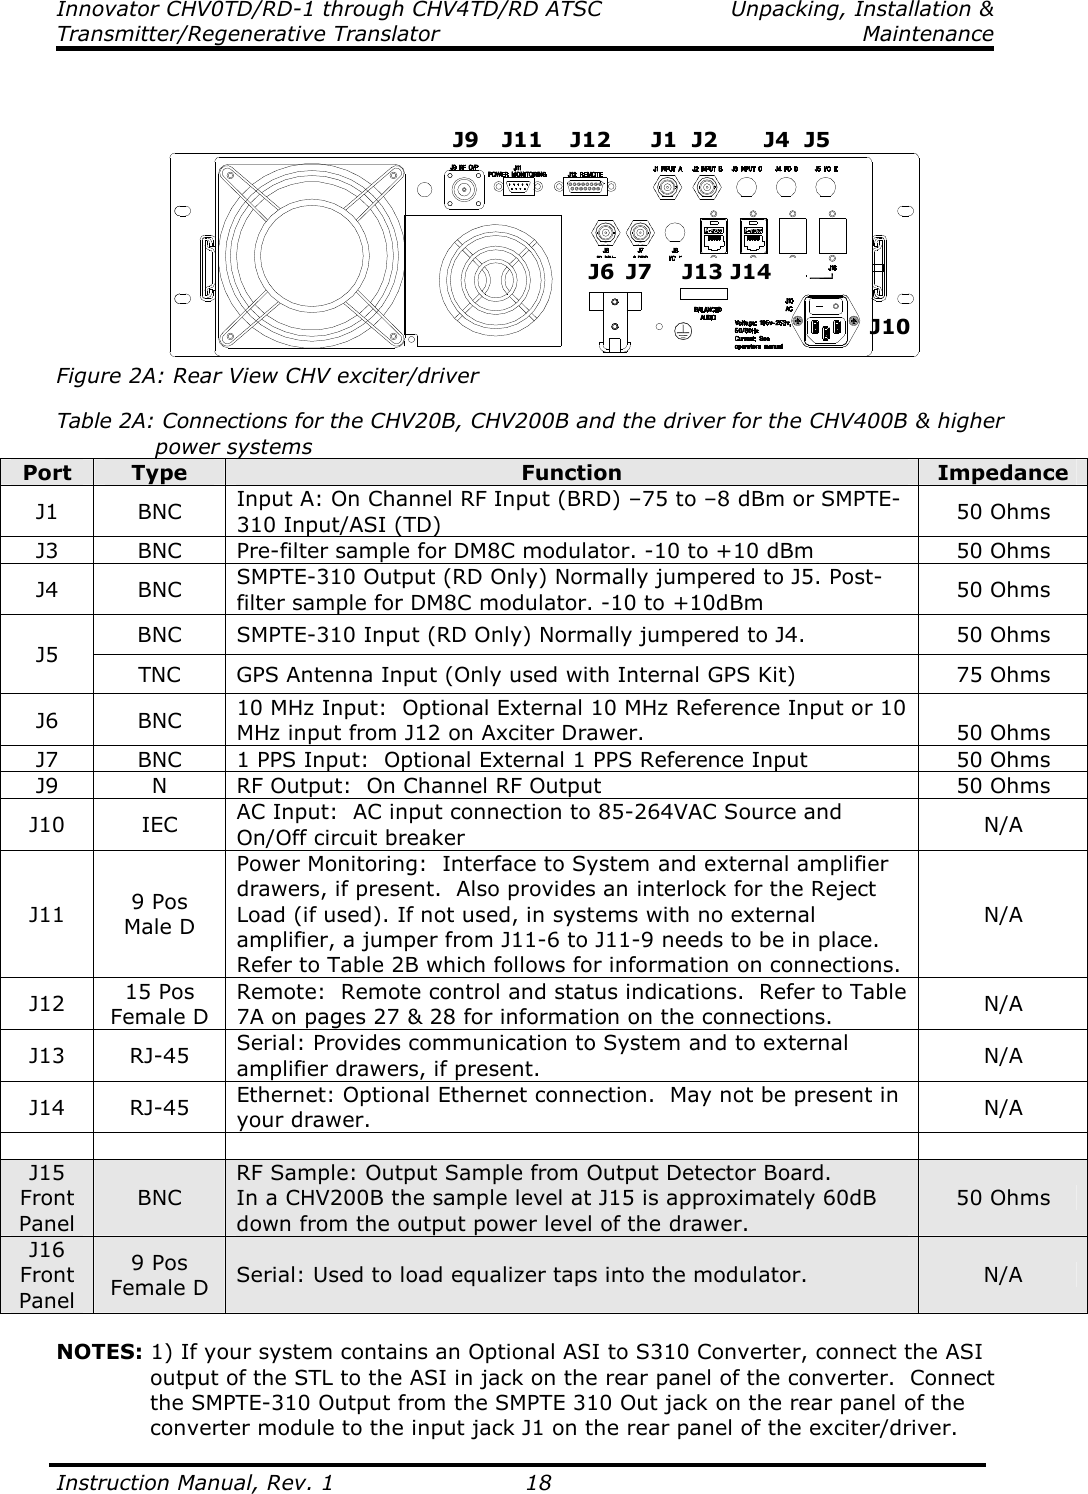 Innovator CHV0TD/RD-1 through CHV4TD/RD ATSC  Unpacking, Installation &amp; Transmitter/Regenerative Translator    Maintenance  Instruction Manual, Rev. 1    18     Figure 2A: Rear View CHV exciter/driver  Table 2A: Connections for the CHV20B, CHV200B and the driver for the CHV400B &amp; higher       power systems Port  Type  Function  Impedance J1  BNC  Input A: On Channel RF Input (BRD) –75 to –8 dBm or SMPTE-310 Input/ASI (TD)  50 Ohms J3  BNC  Pre-filter sample for DM8C modulator. -10 to +10 dBm  50 Ohms J4  BNC  SMPTE-310 Output (RD Only) Normally jumpered to J5. Post-filter sample for DM8C modulator. -10 to +10dBm  50 Ohms BNC  SMPTE-310 Input (RD Only) Normally jumpered to J4.  50 Ohms J5 TNC  GPS Antenna Input (Only used with Internal GPS Kit)  75 Ohms J6  BNC  10 MHz Input:  Optional External 10 MHz Reference Input or 10 MHz input from J12 on Axciter Drawer.  50 Ohms J7  BNC  1 PPS Input:  Optional External 1 PPS Reference Input  50 Ohms J9  N  RF Output:  On Channel RF Output  50 Ohms J10  IEC  AC Input:  AC input connection to 85-264VAC Source and On/Off circuit breaker  N/A J11  9 Pos Male D Power Monitoring:  Interface to System and external amplifier drawers, if present.  Also provides an interlock for the Reject Load (if used). If not used, in systems with no external amplifier, a jumper from J11-6 to J11-9 needs to be in place.  Refer to Table 2B which follows for information on connections. N/A J12  15 Pos Female D Remote:  Remote control and status indications.  Refer to Table 7A on pages 27 &amp; 28 for information on the connections.  N/A J13  RJ-45  Serial: Provides communication to System and to external amplifier drawers, if present.  N/A J14  RJ-45  Ethernet: Optional Ethernet connection.  May not be present in your drawer.  N/A        J15 Front Panel BNC RF Sample: Output Sample from Output Detector Board. In a CHV200B the sample level at J15 is approximately 60dB down from the output power level of the drawer. 50 Ohms J16 Front Panel 9 Pos Female D  Serial: Used to load equalizer taps into the modulator.  N/A  NOTES: 1) If your system contains an Optional ASI to S310 Converter, connect the ASI output of the STL to the ASI in jack on the rear panel of the converter.  Connect the SMPTE-310 Output from the SMPTE 310 Out jack on the rear panel of the converter module to the input jack J1 on the rear panel of the exciter/driver. J1  J2   J11 J12  J10  J6  J9  J7  J13 J14 J4  J5 